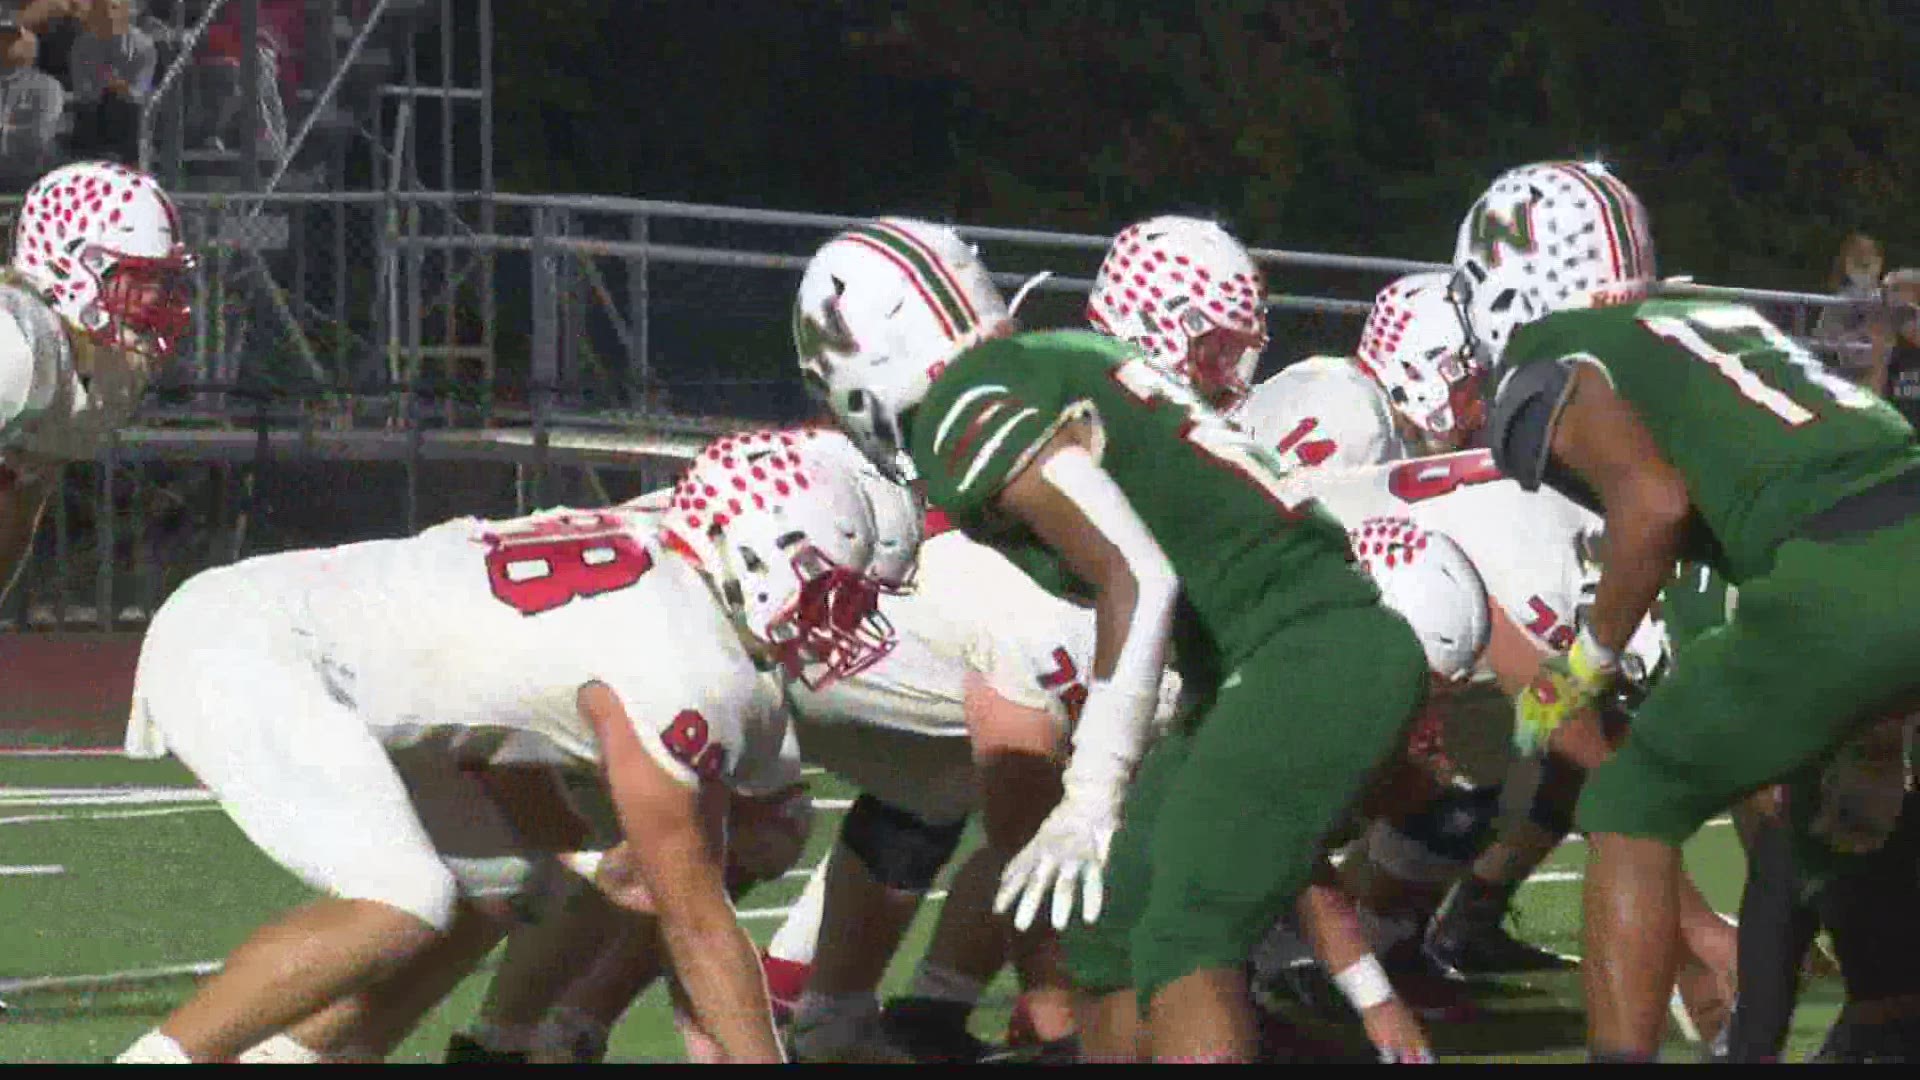 Top-ranked Center Grove remains undefeated after a win Friday night on the road.